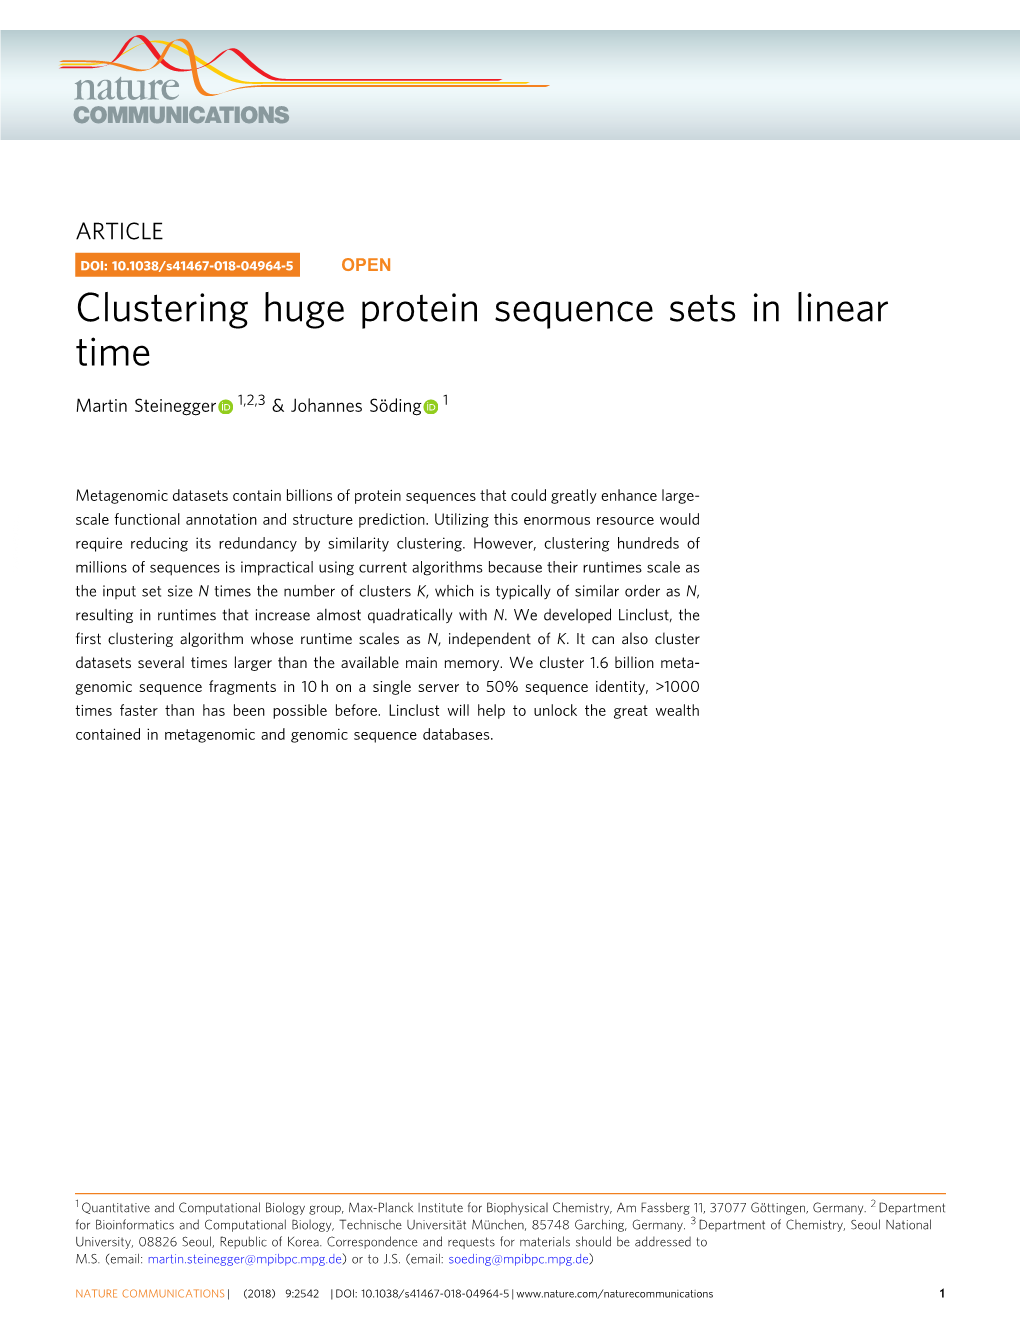 Clustering Huge Protein Sequence Sets in Linear Time